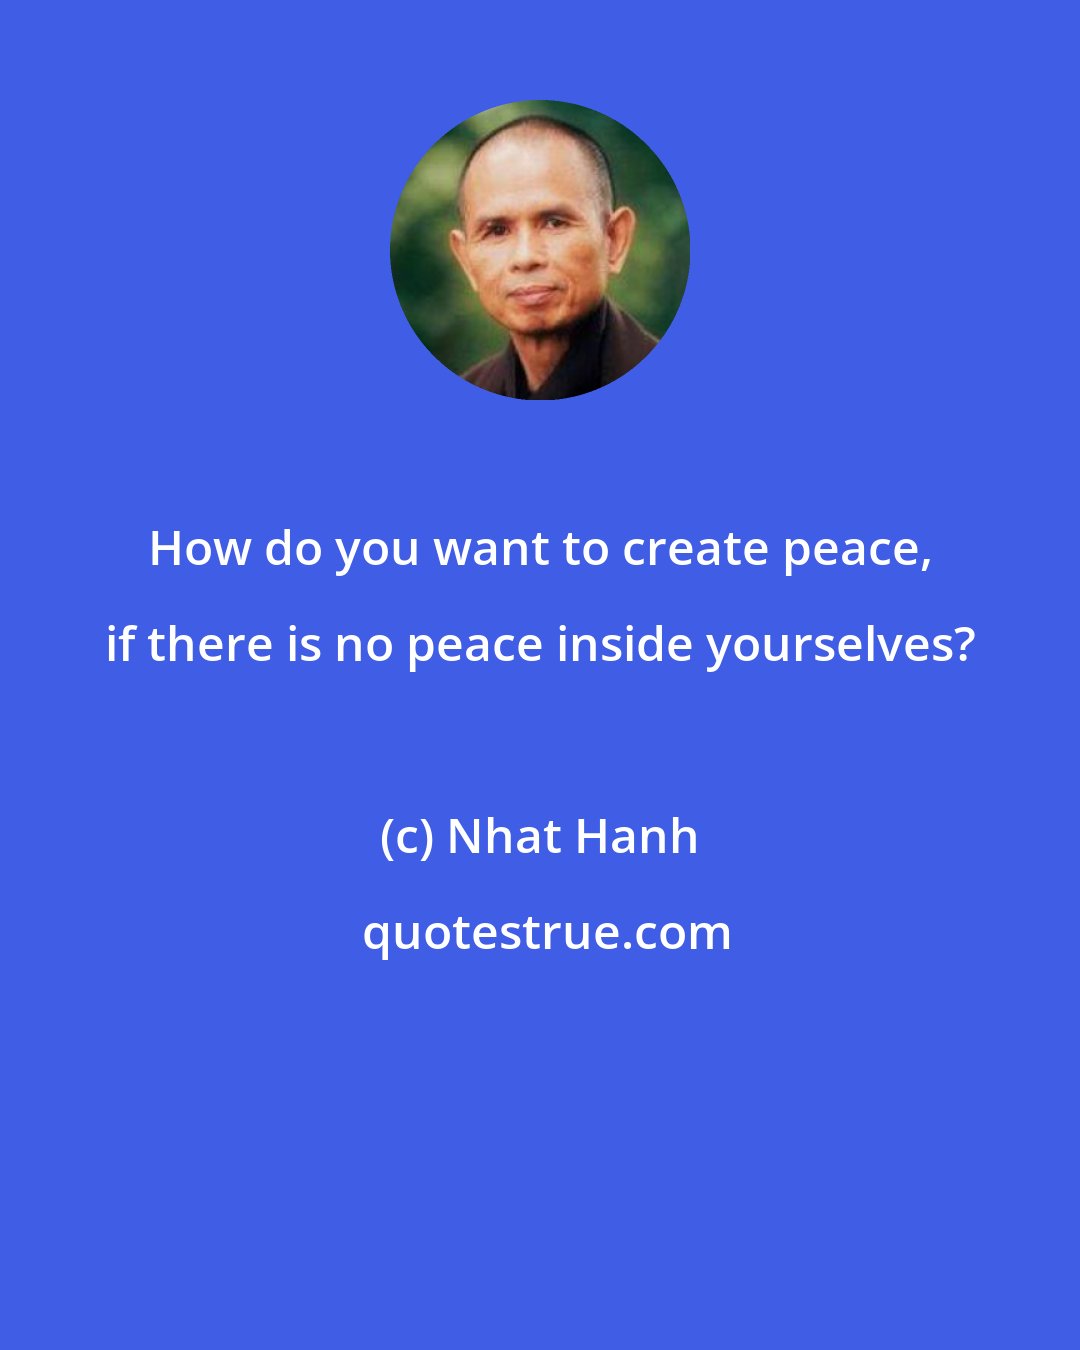 Nhat Hanh: How do you want to create peace, if there is no peace inside yourselves?